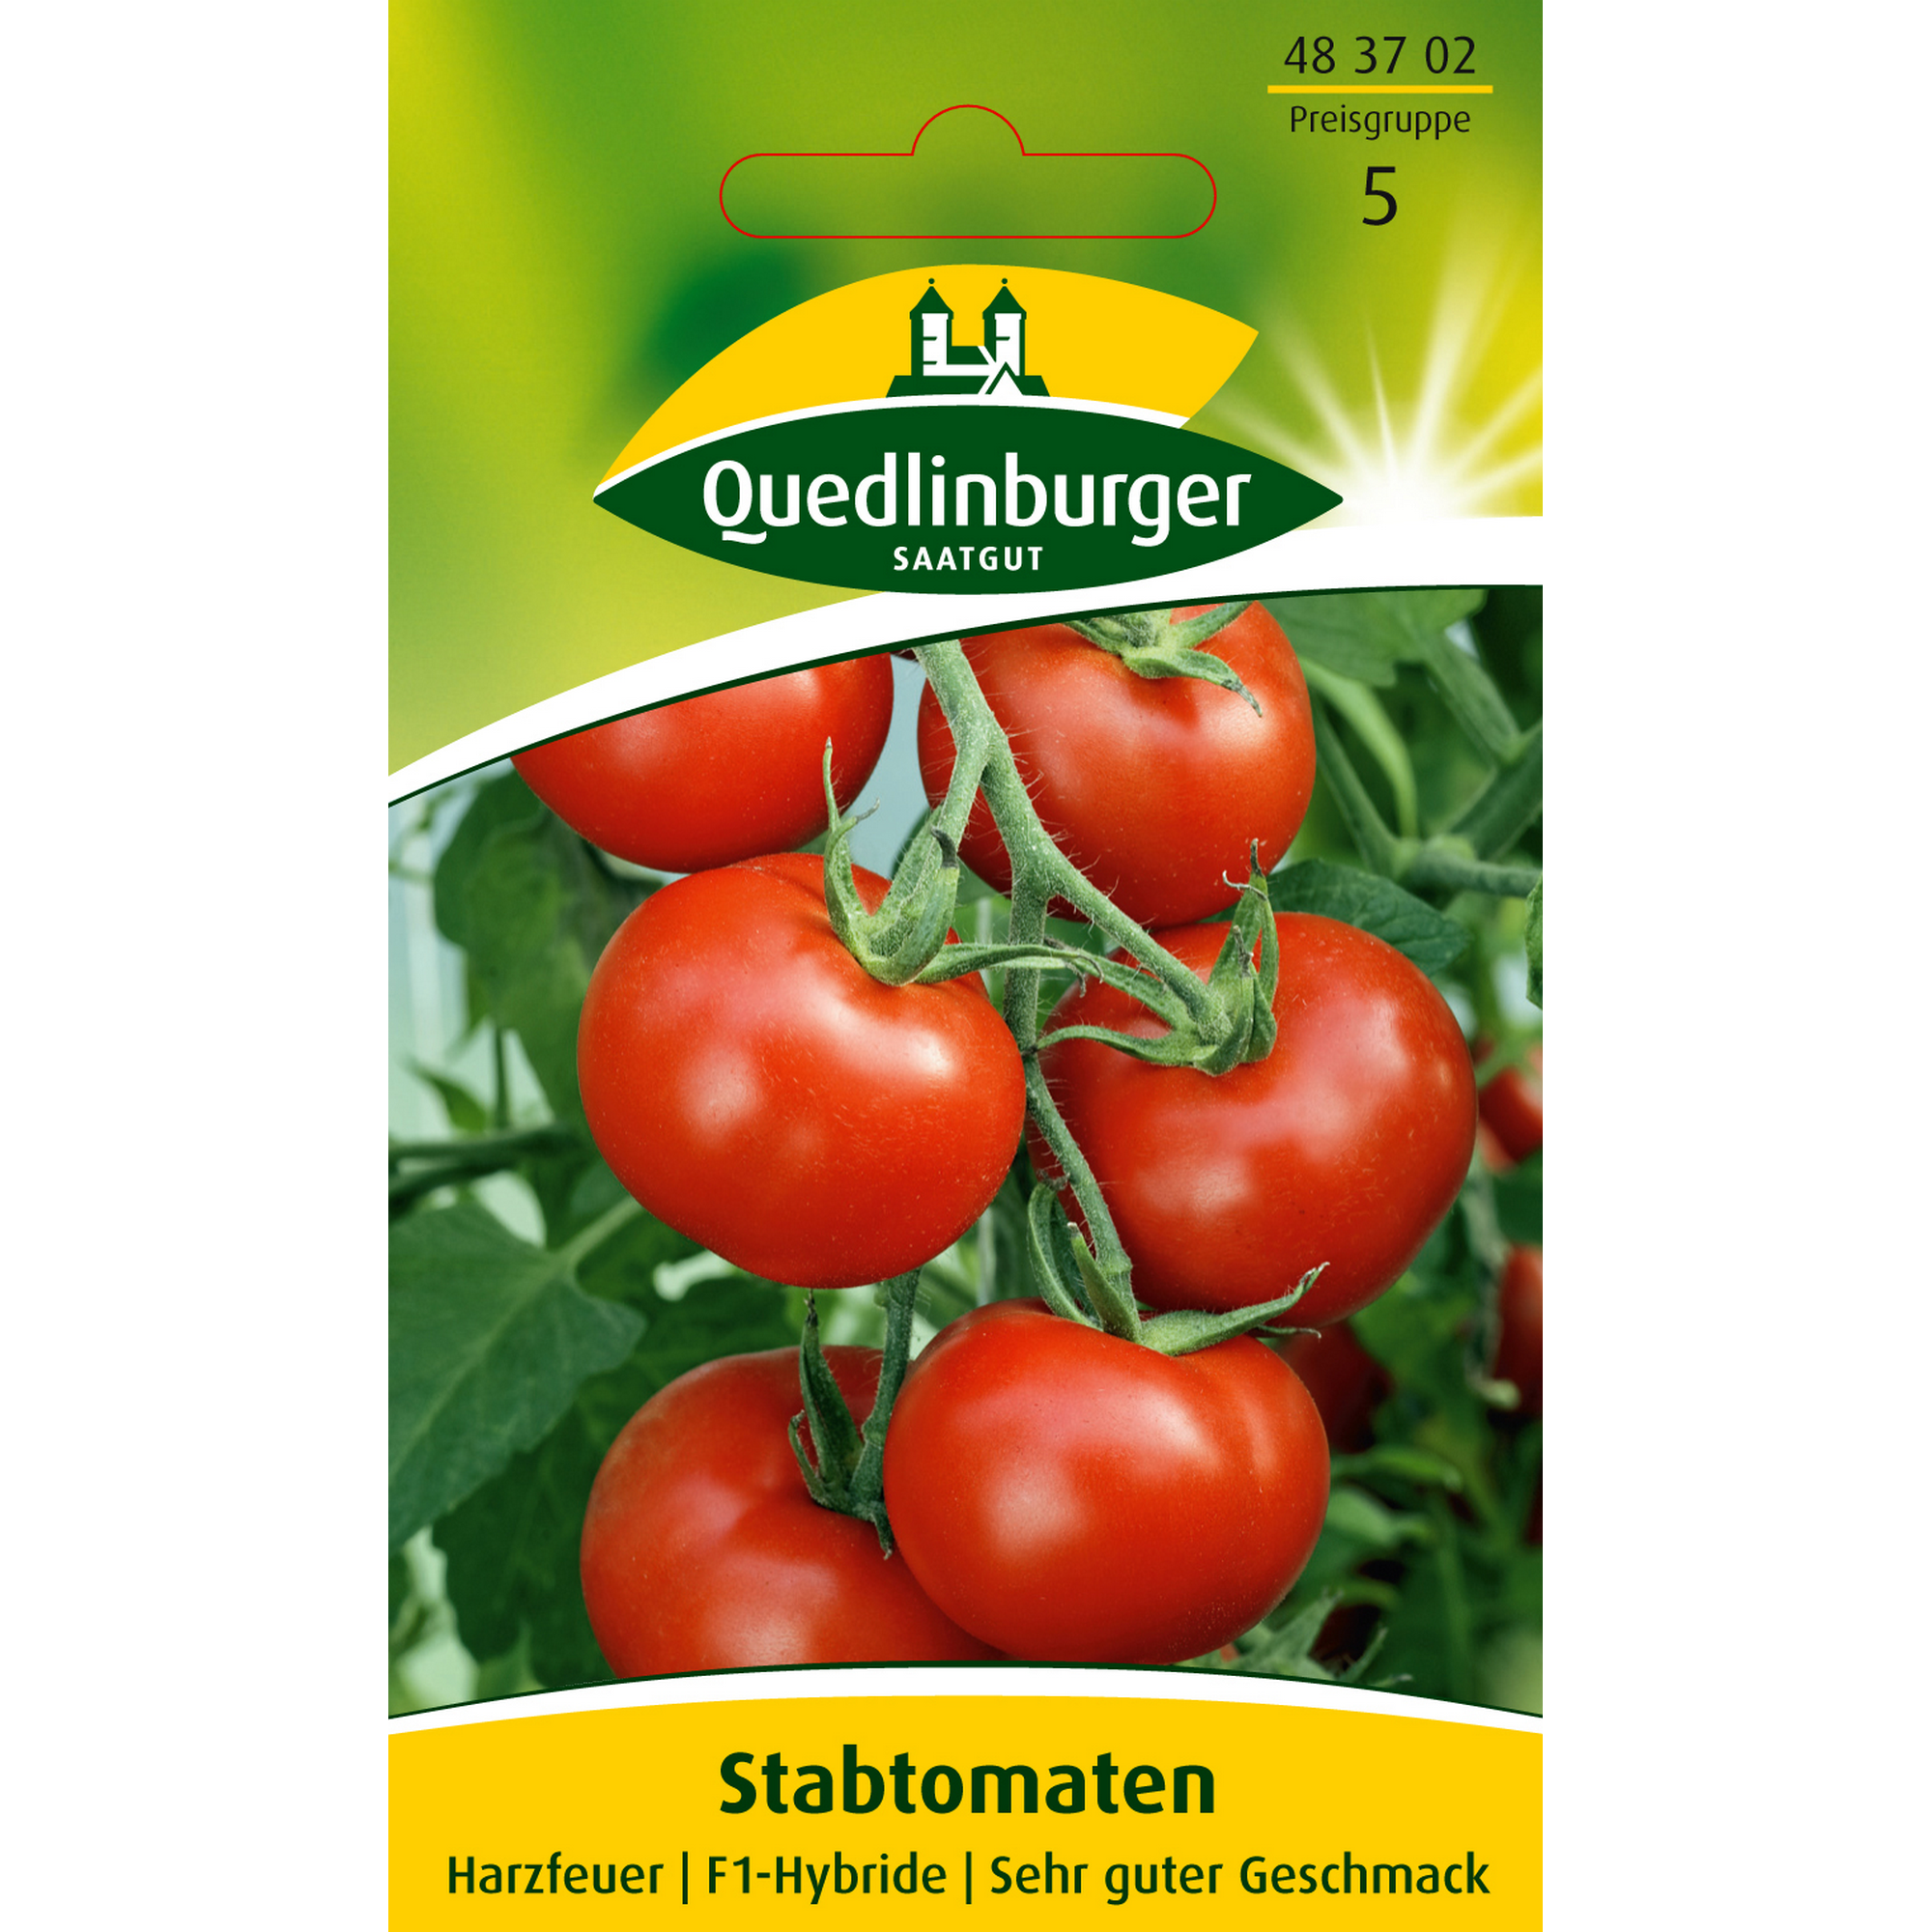 Stabtomate 'Harzfeuer' + product picture